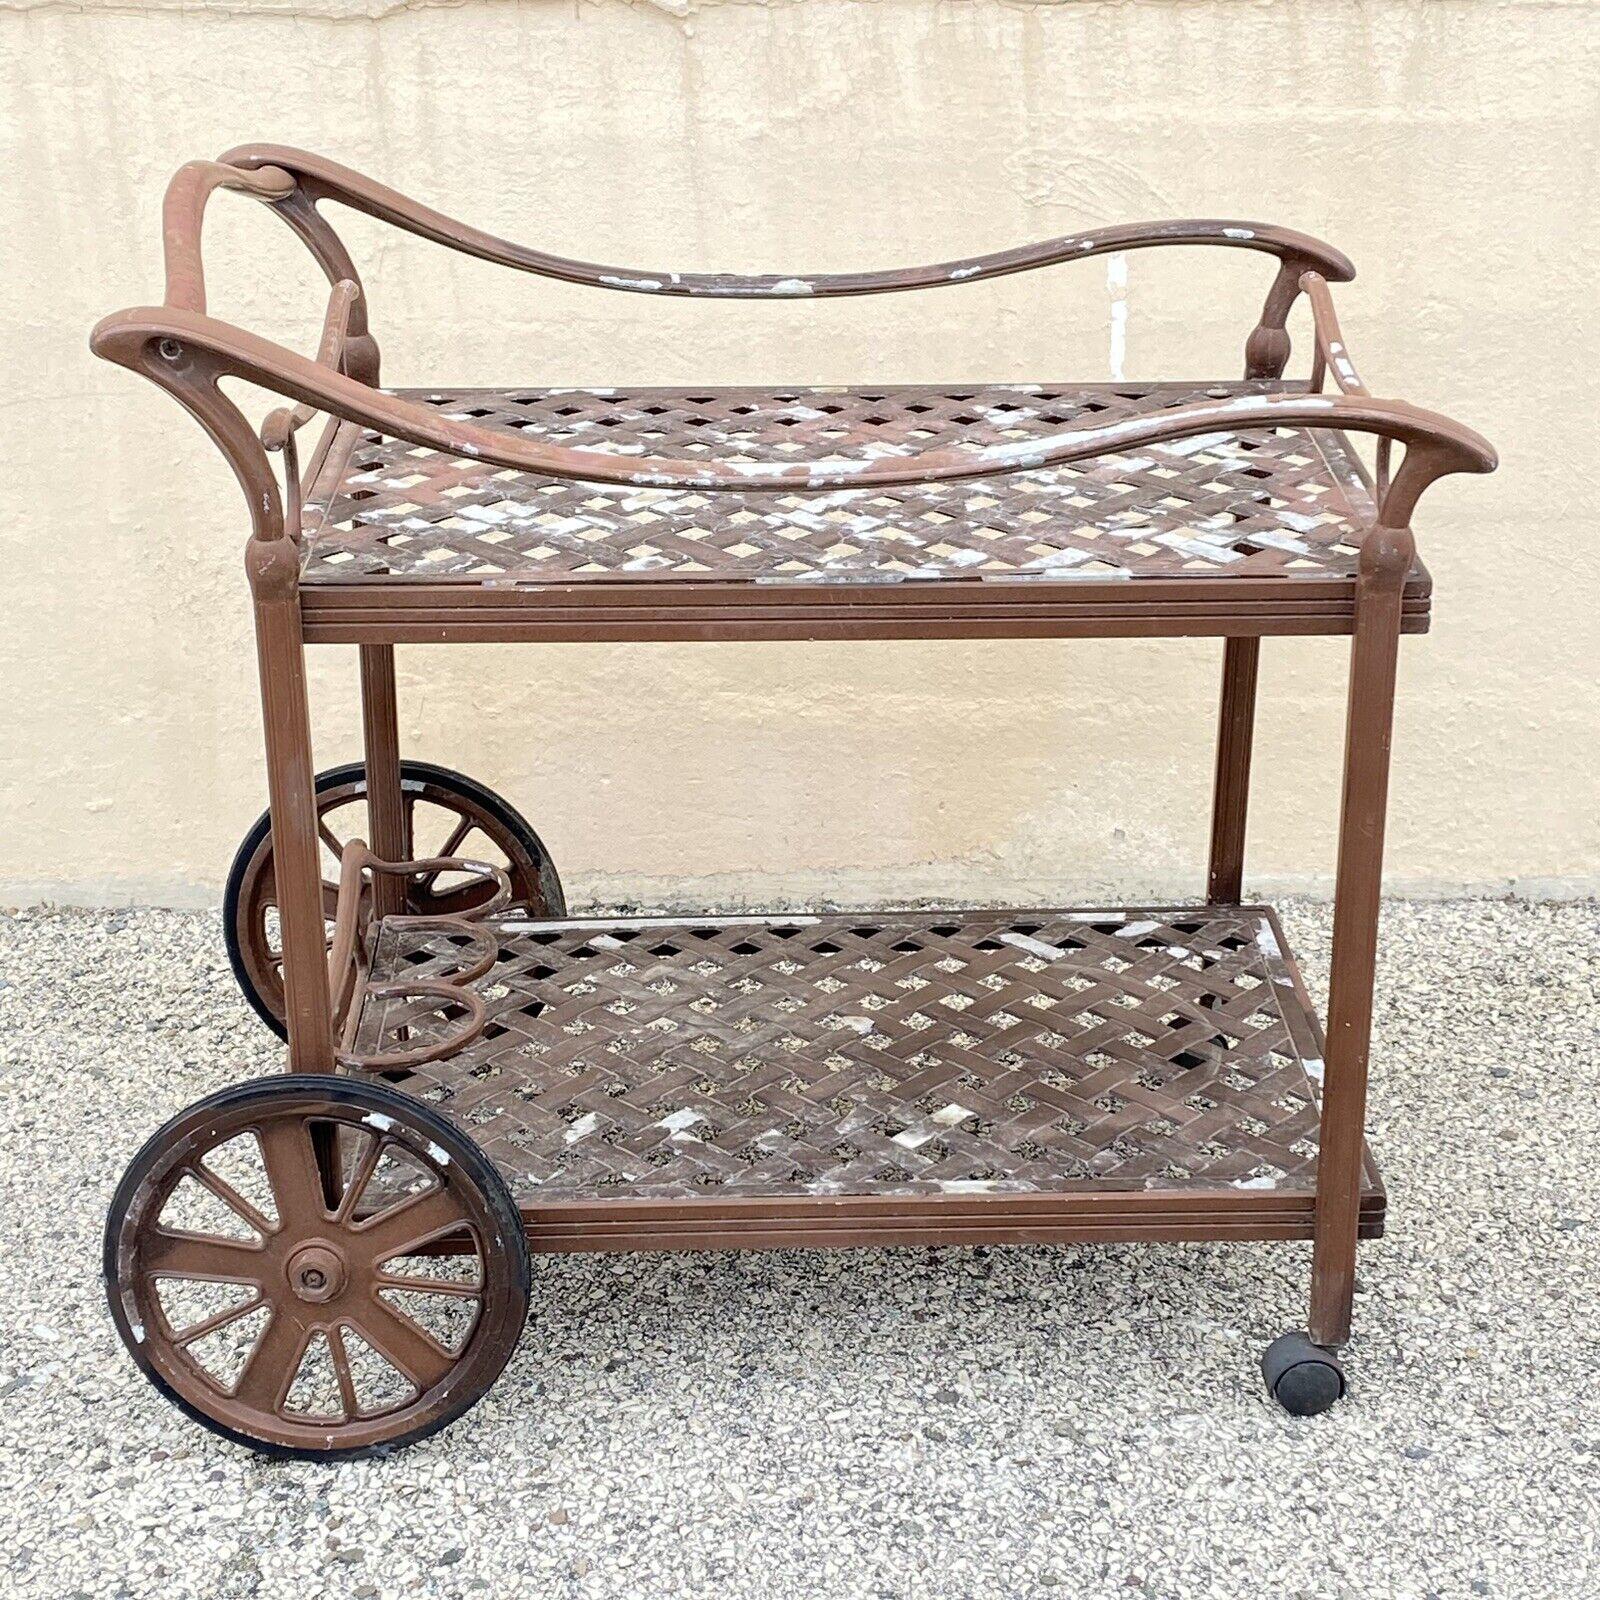 Cast Aluminum Garden Patio Terrace Rolling Serving Bar Table Pool Tea Cart. Item features a heavy cast aluminum construction, removable serving tray with handles, 2 tiers, rolling wheels, great style and form. Circa Late 20th - 21st Century.